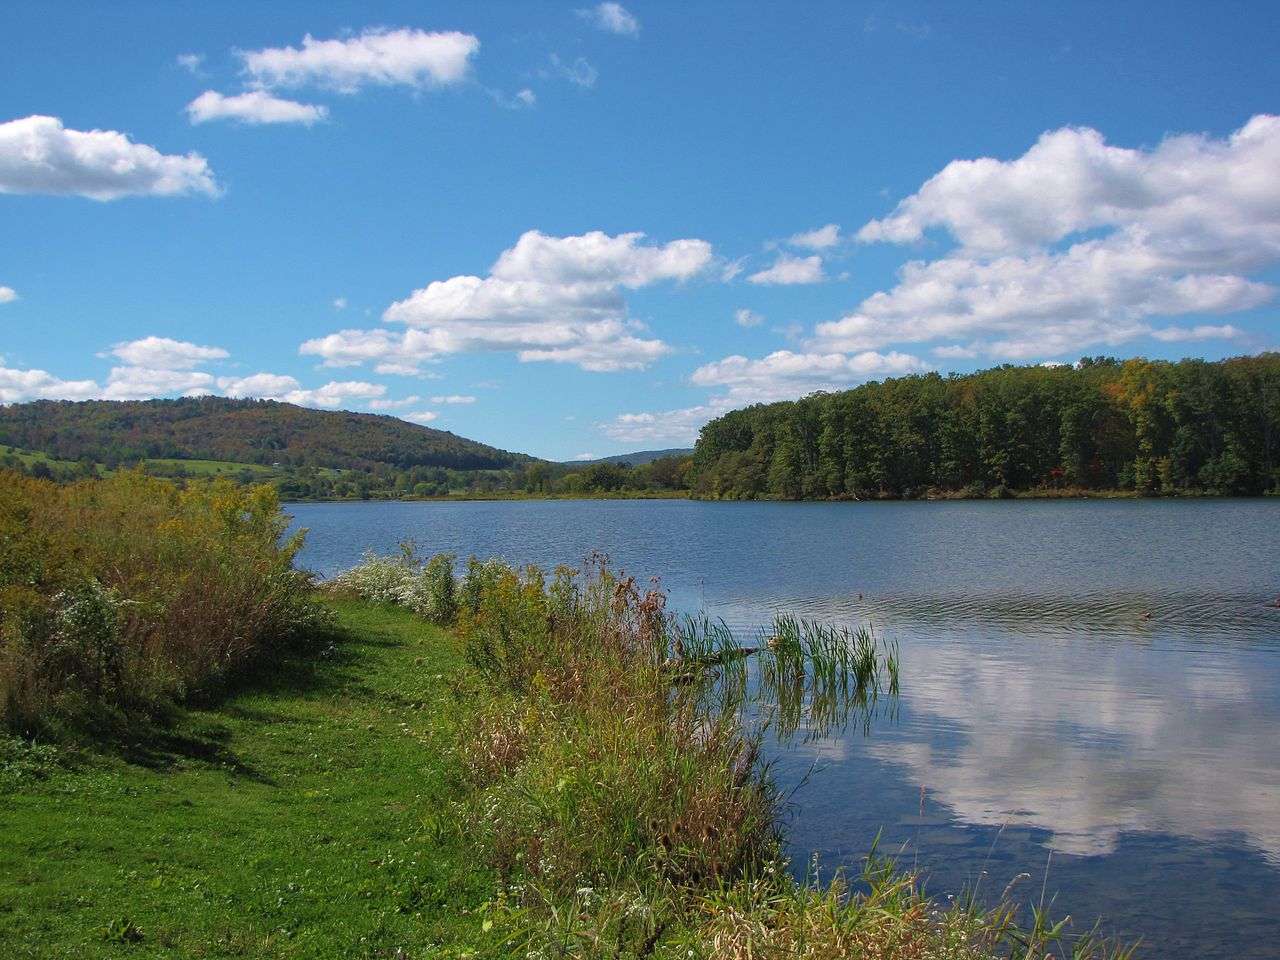 Cowanesque Lake - area around the lake is groomed for outdoor adventure